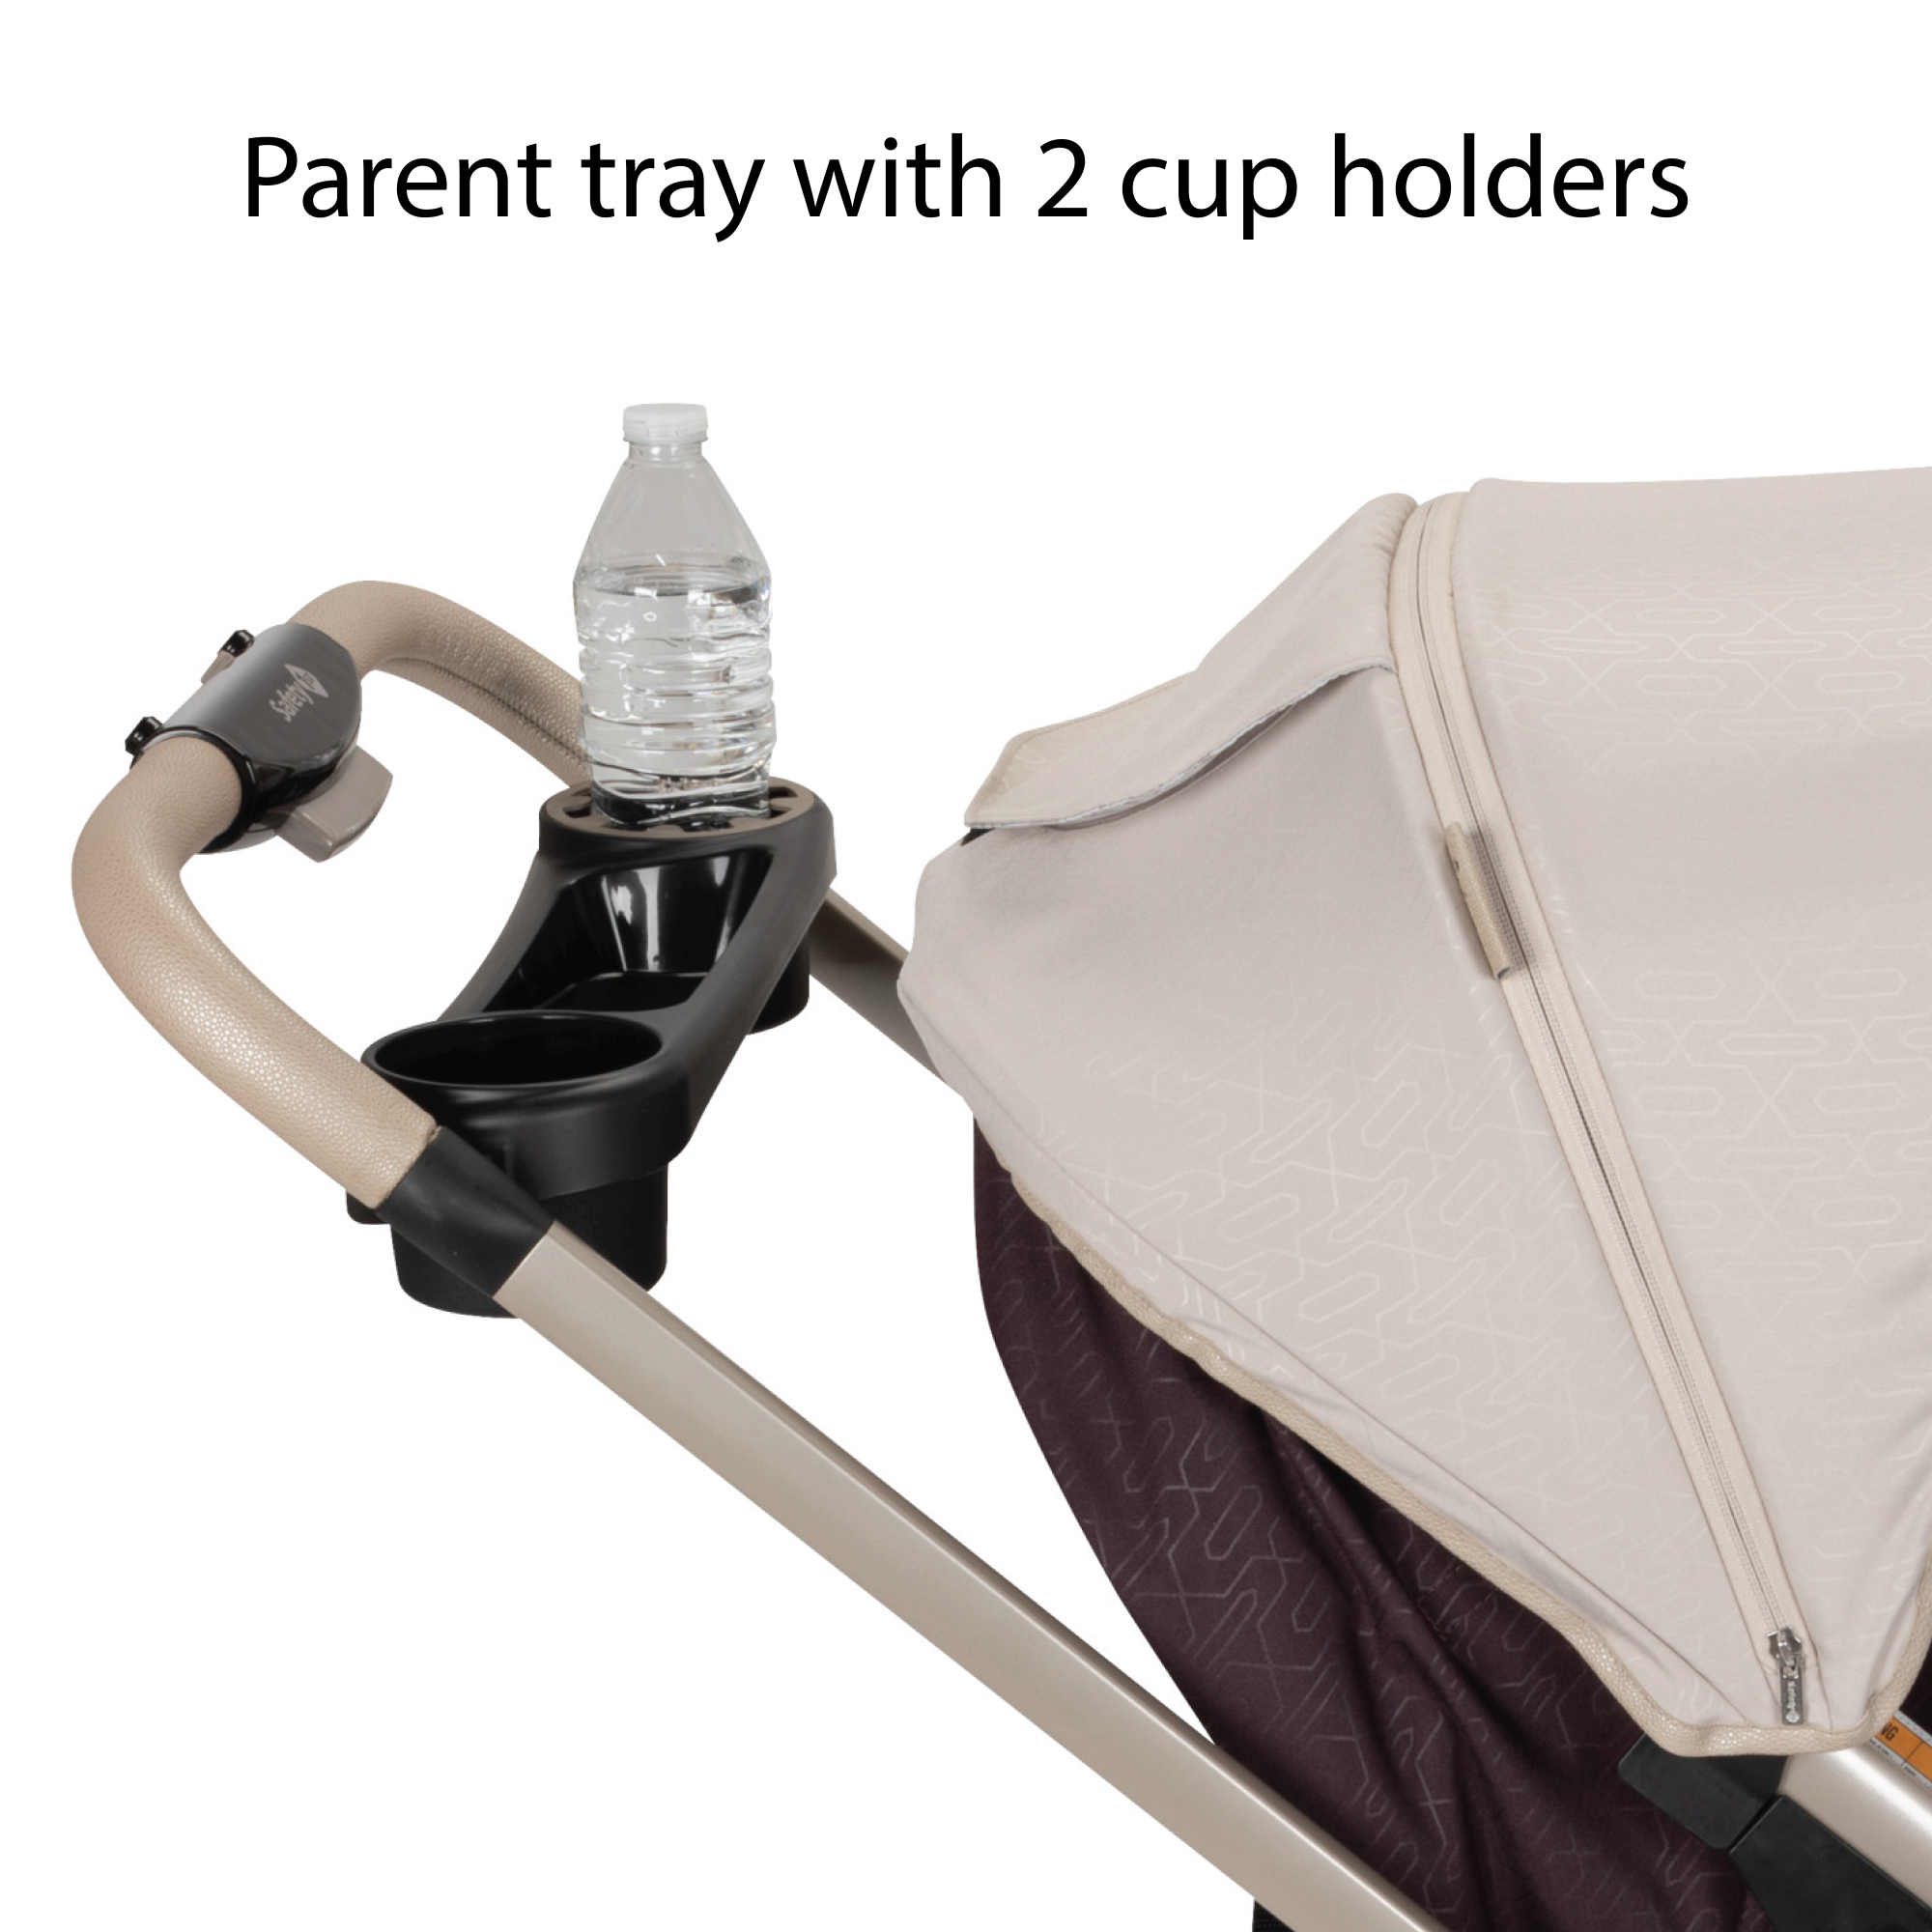 Deluxe Grow and Go™ Flex 8-in-1 Travel System - folds easily with one hand and stands on its own